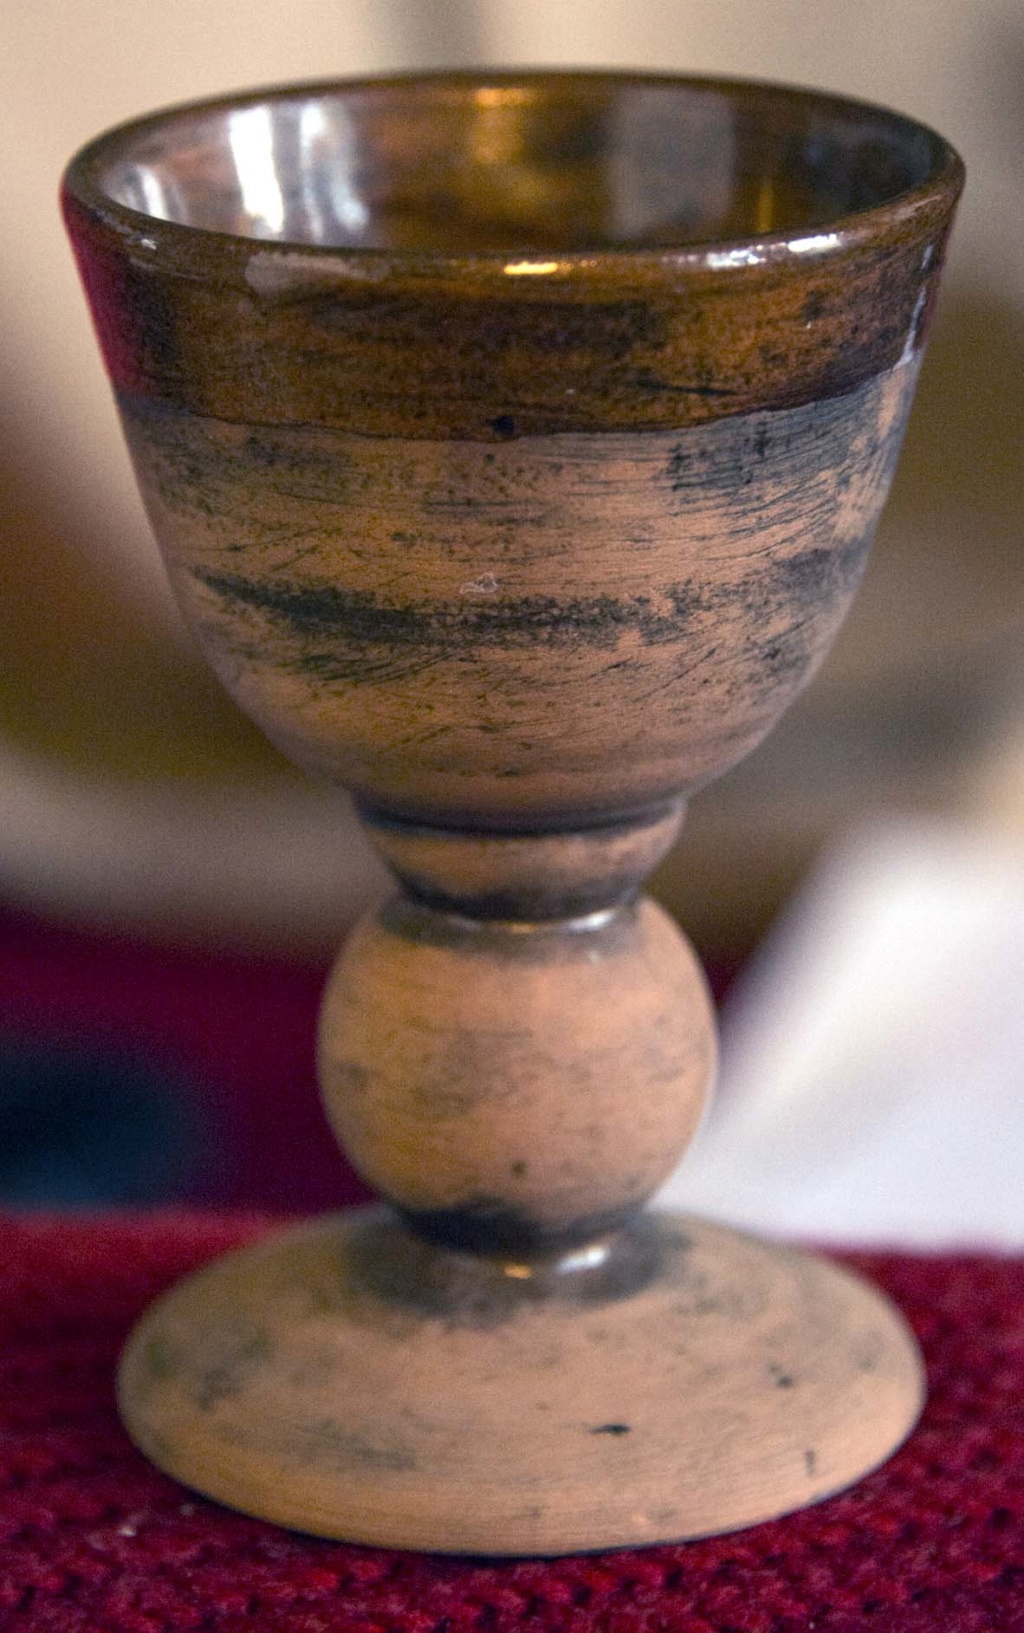 Cleary marked, partially glazed goblet- help identifying please... Bgoble11